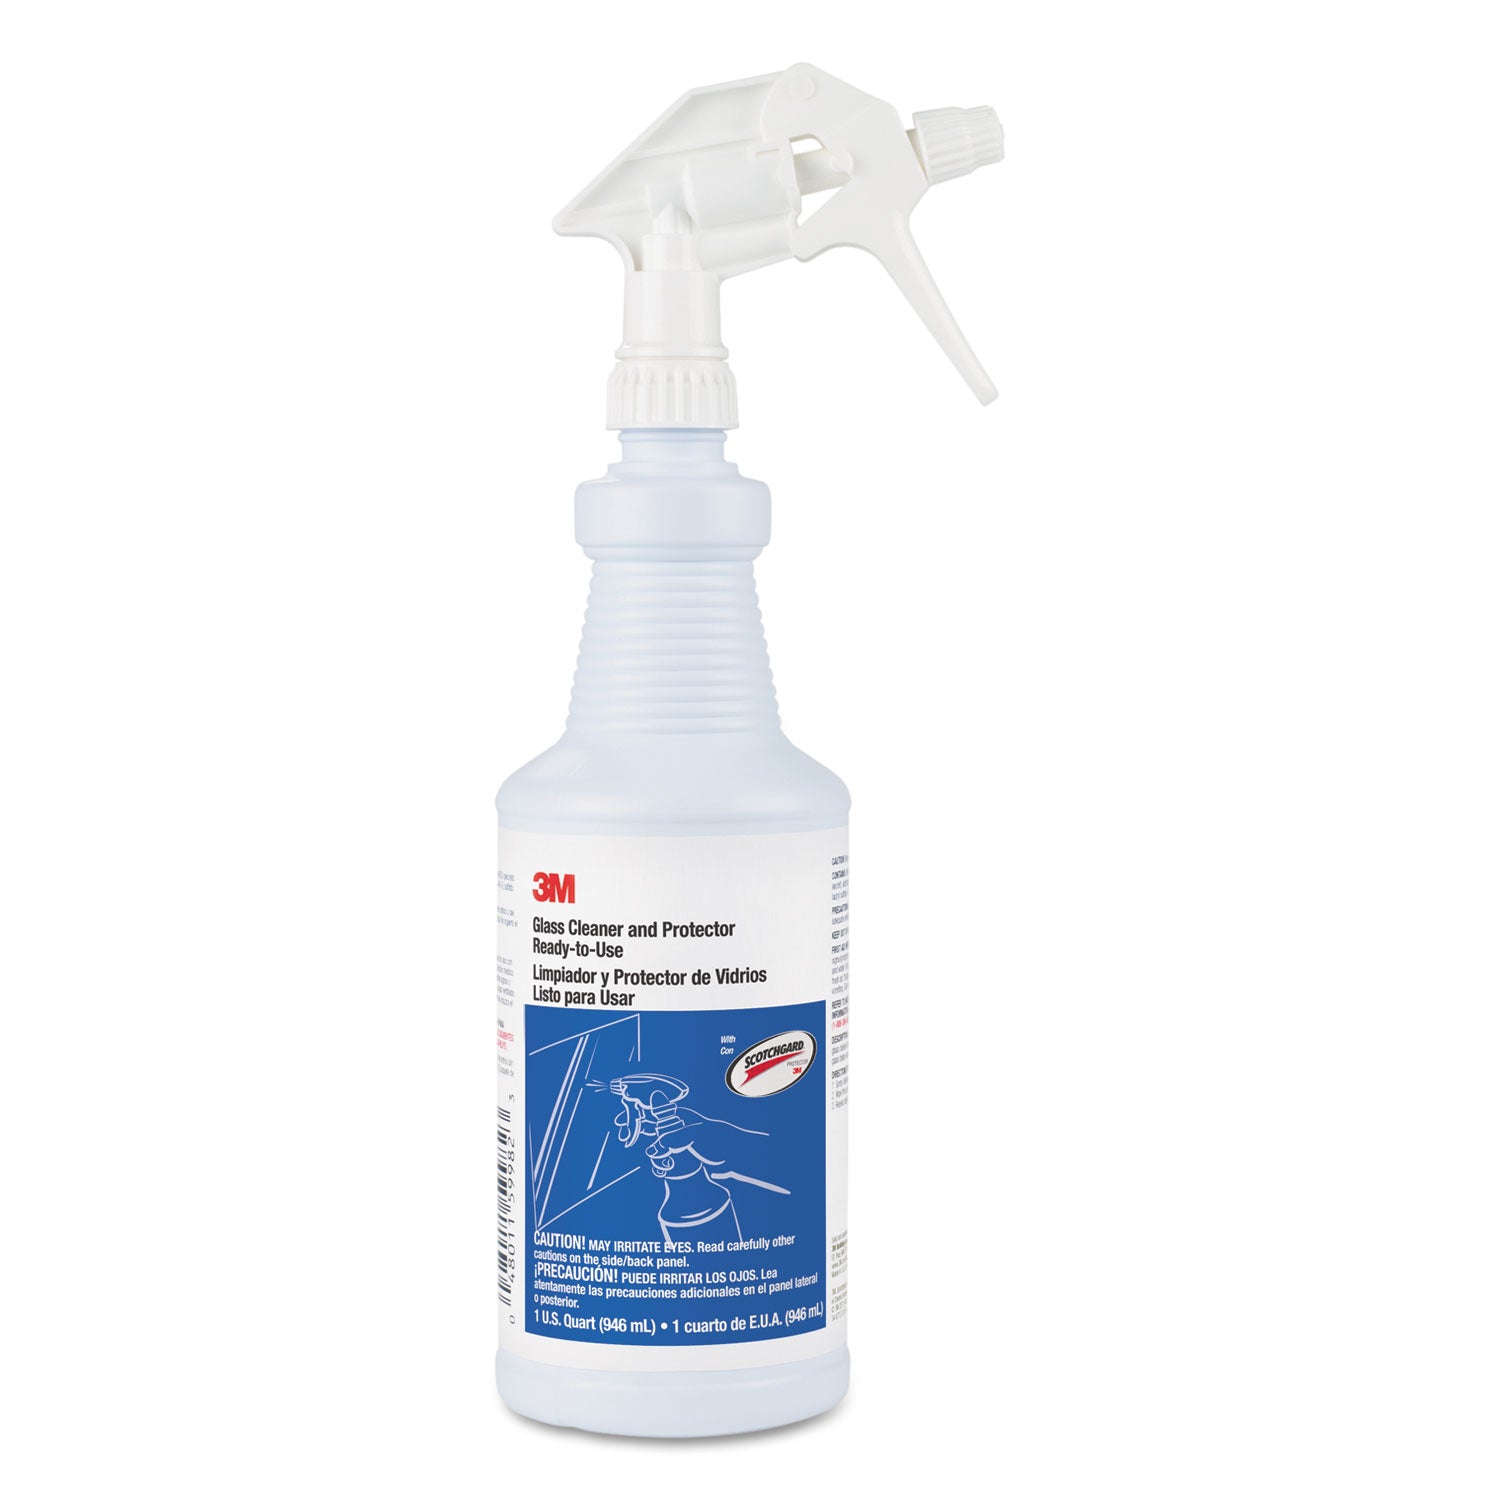 ready-to-use-glass-cleaner-with-scotchgard-apple-32-oz-spray-bottle-12-carton_mmm85788ct - 1